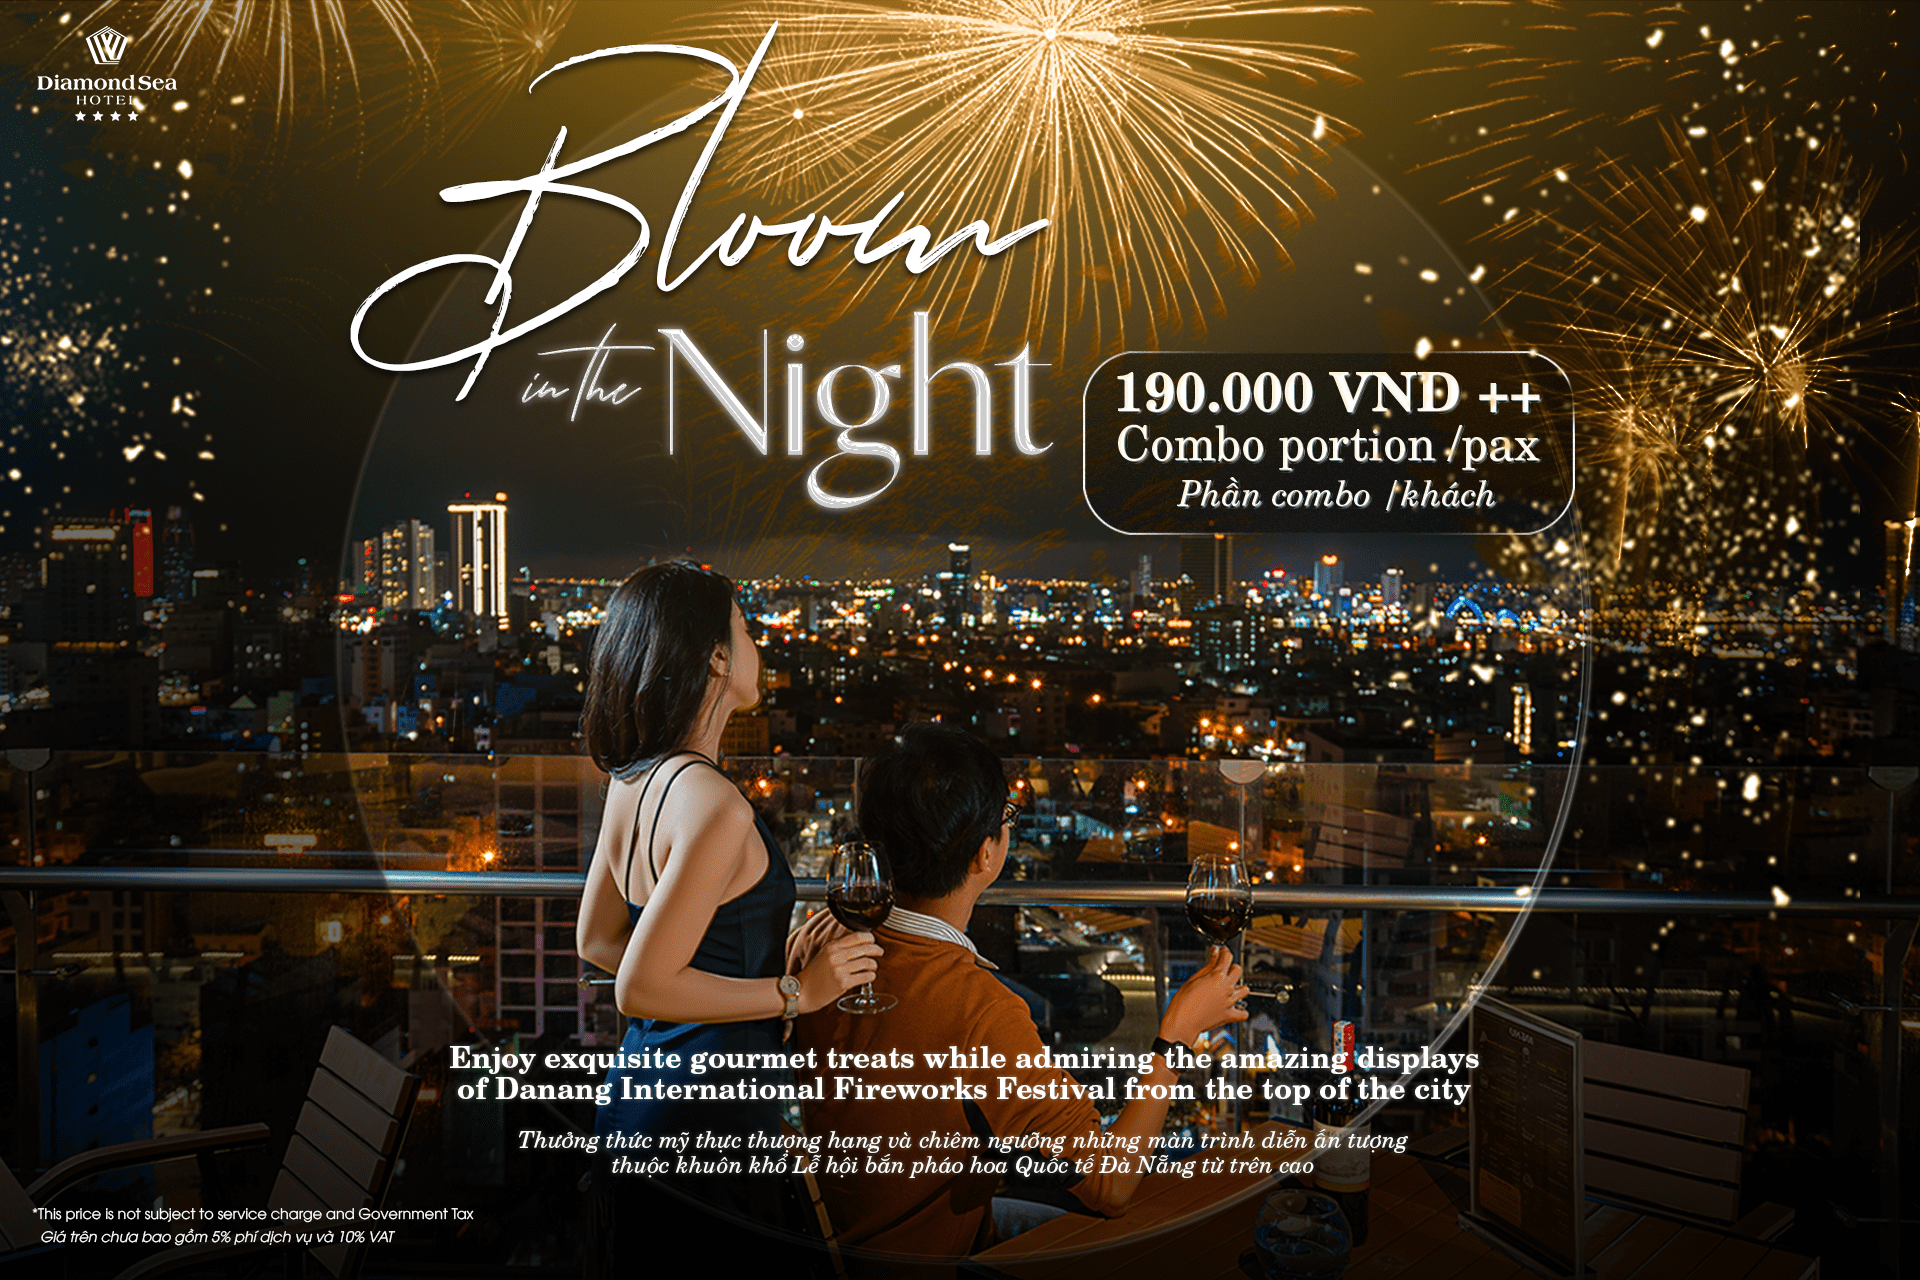 Admiring The Da Nang International Firework Festival With “Bloom In The Night” Combo